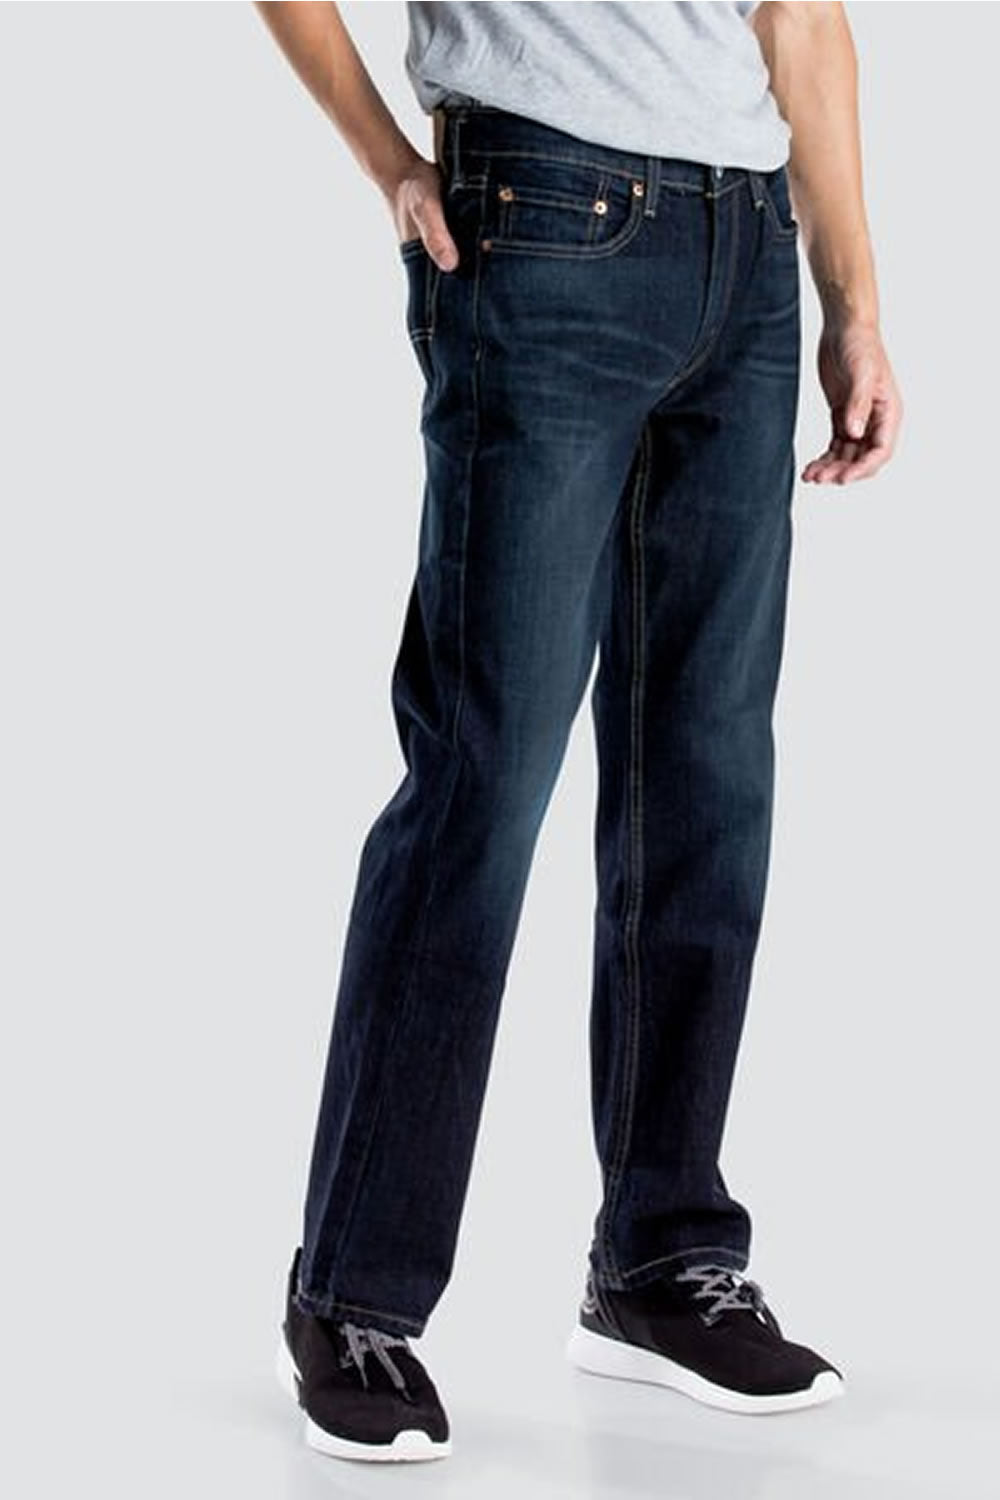 Levi Mens 514 Straight Fit Jean - Titley's Department Store